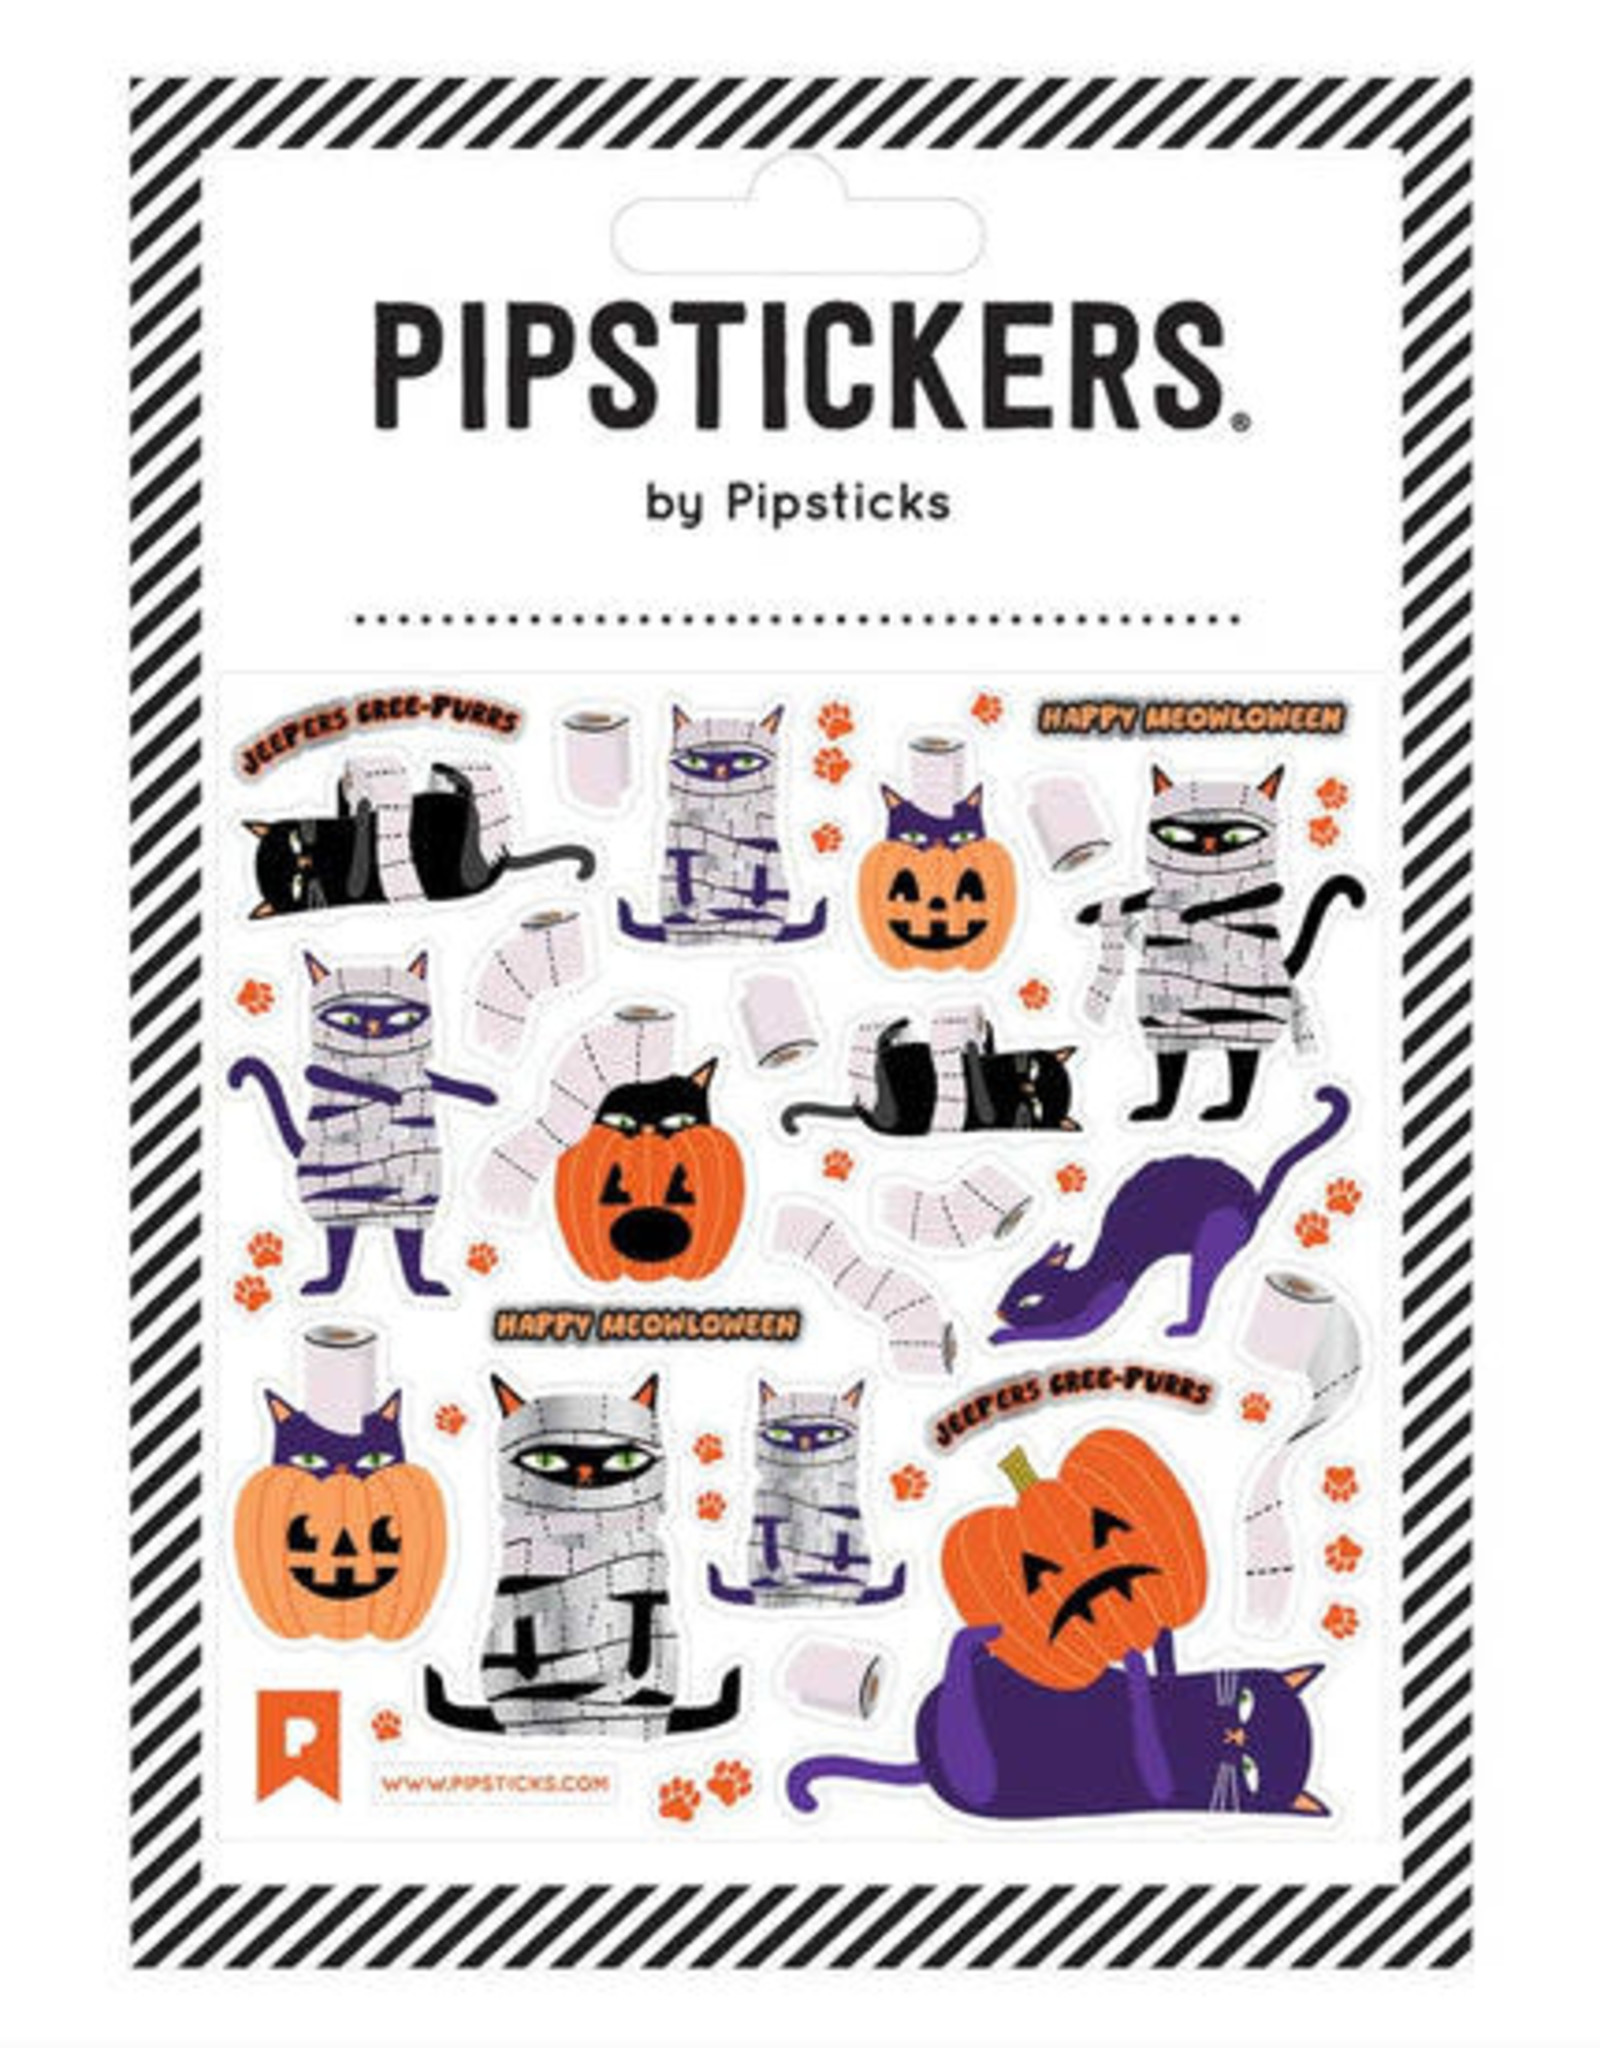 PipSticks Pipsticks Jeepers Cree-Purrs